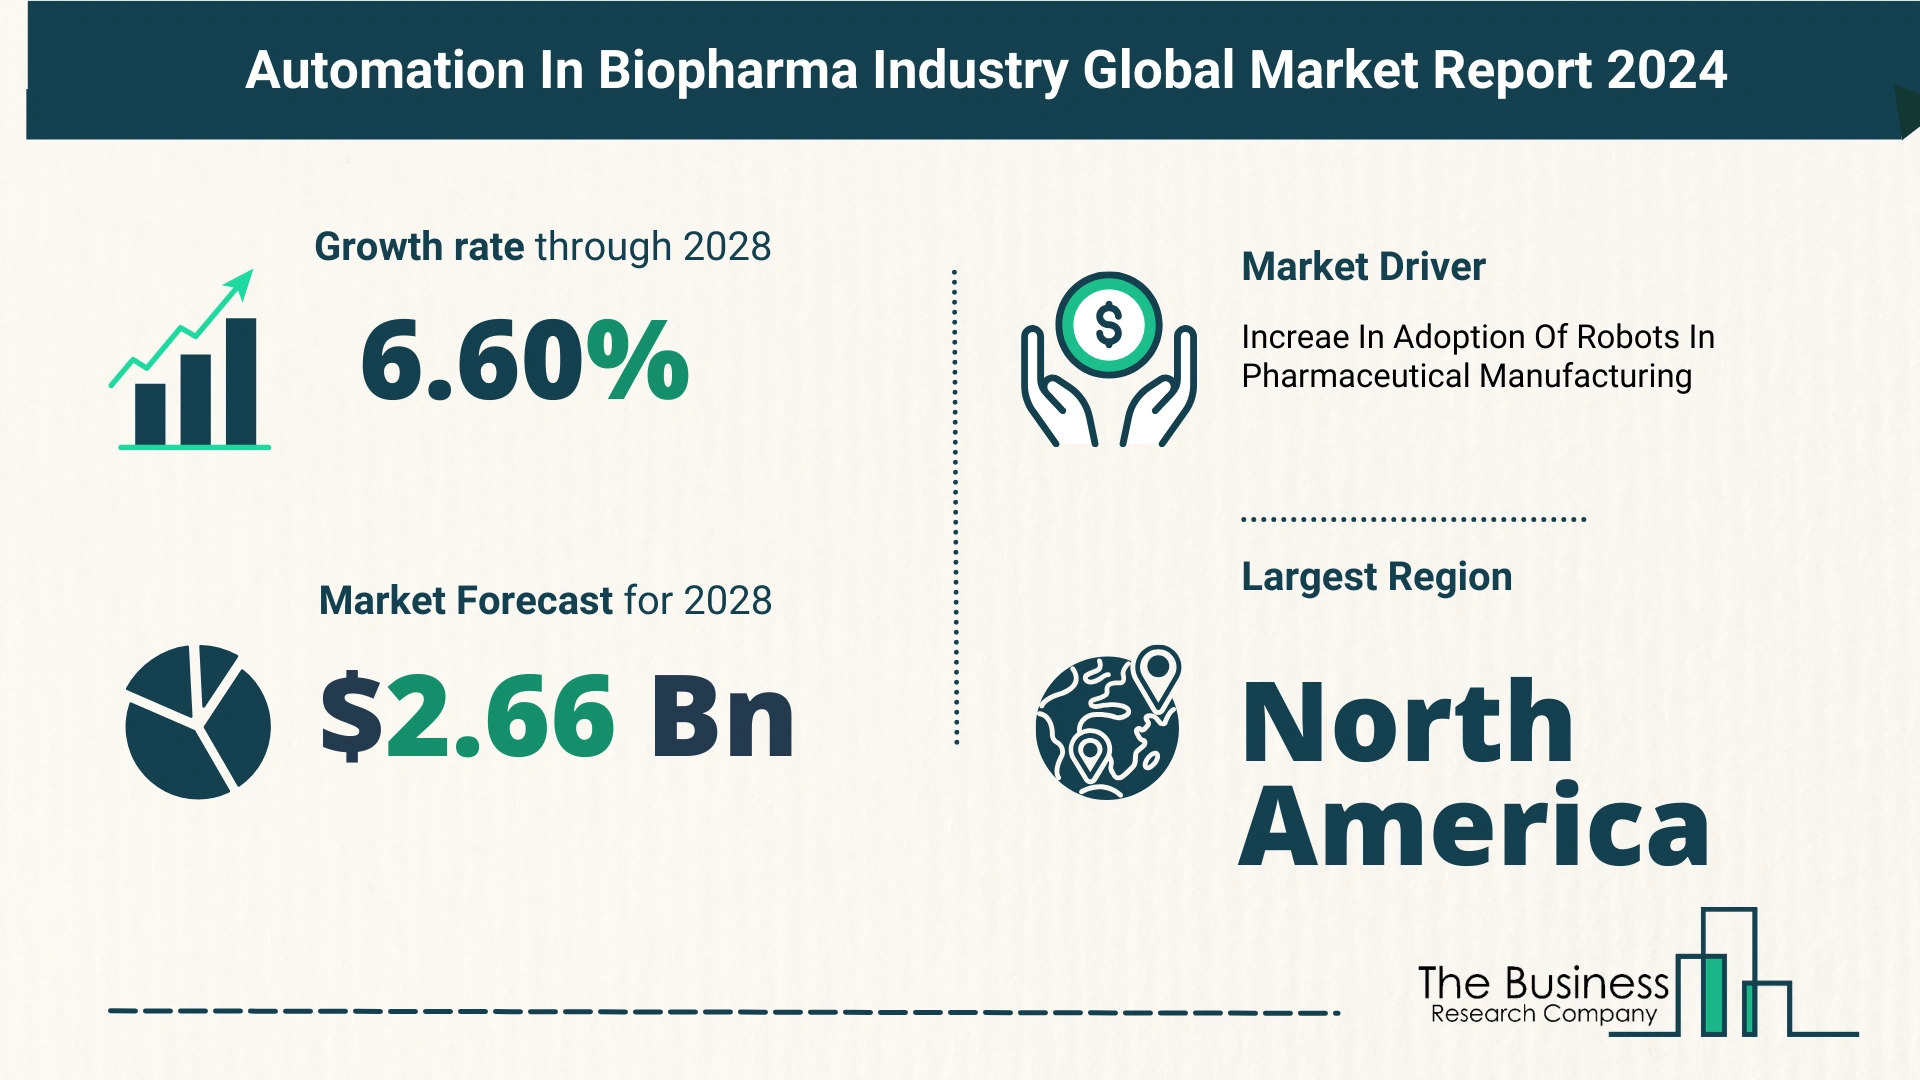 Key Trends And Drivers In The Automation In Biopharma Industry Market 2024